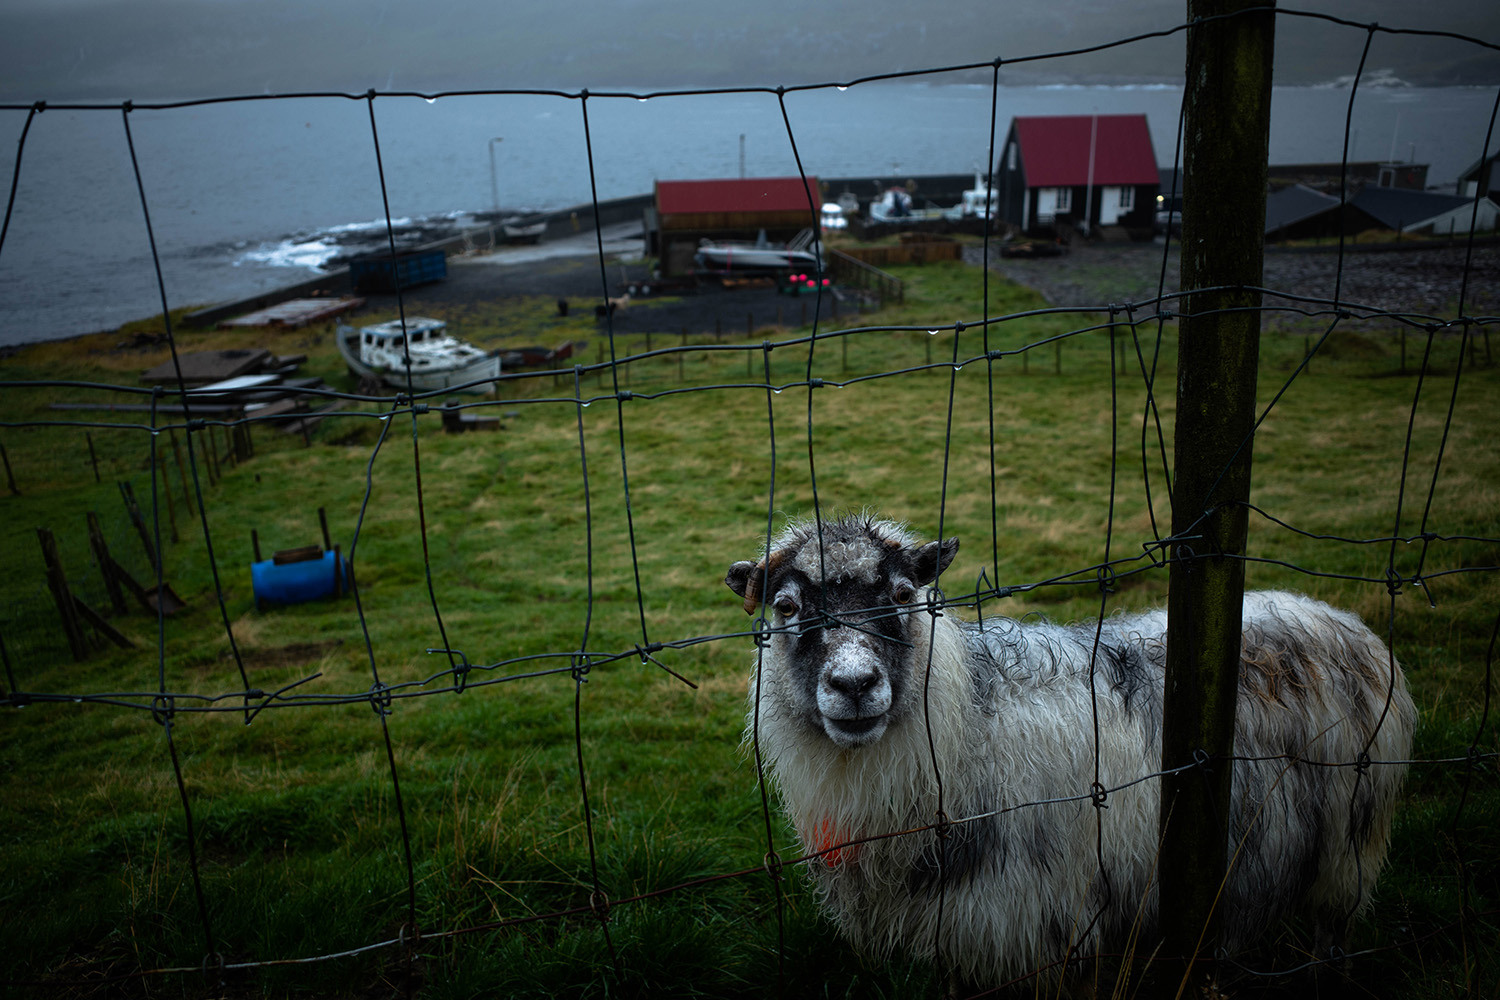 <p>An inquisitive stare from a sheep in the village of Hov. Sheep farming is a major industry in the Faroe Islands.</p>